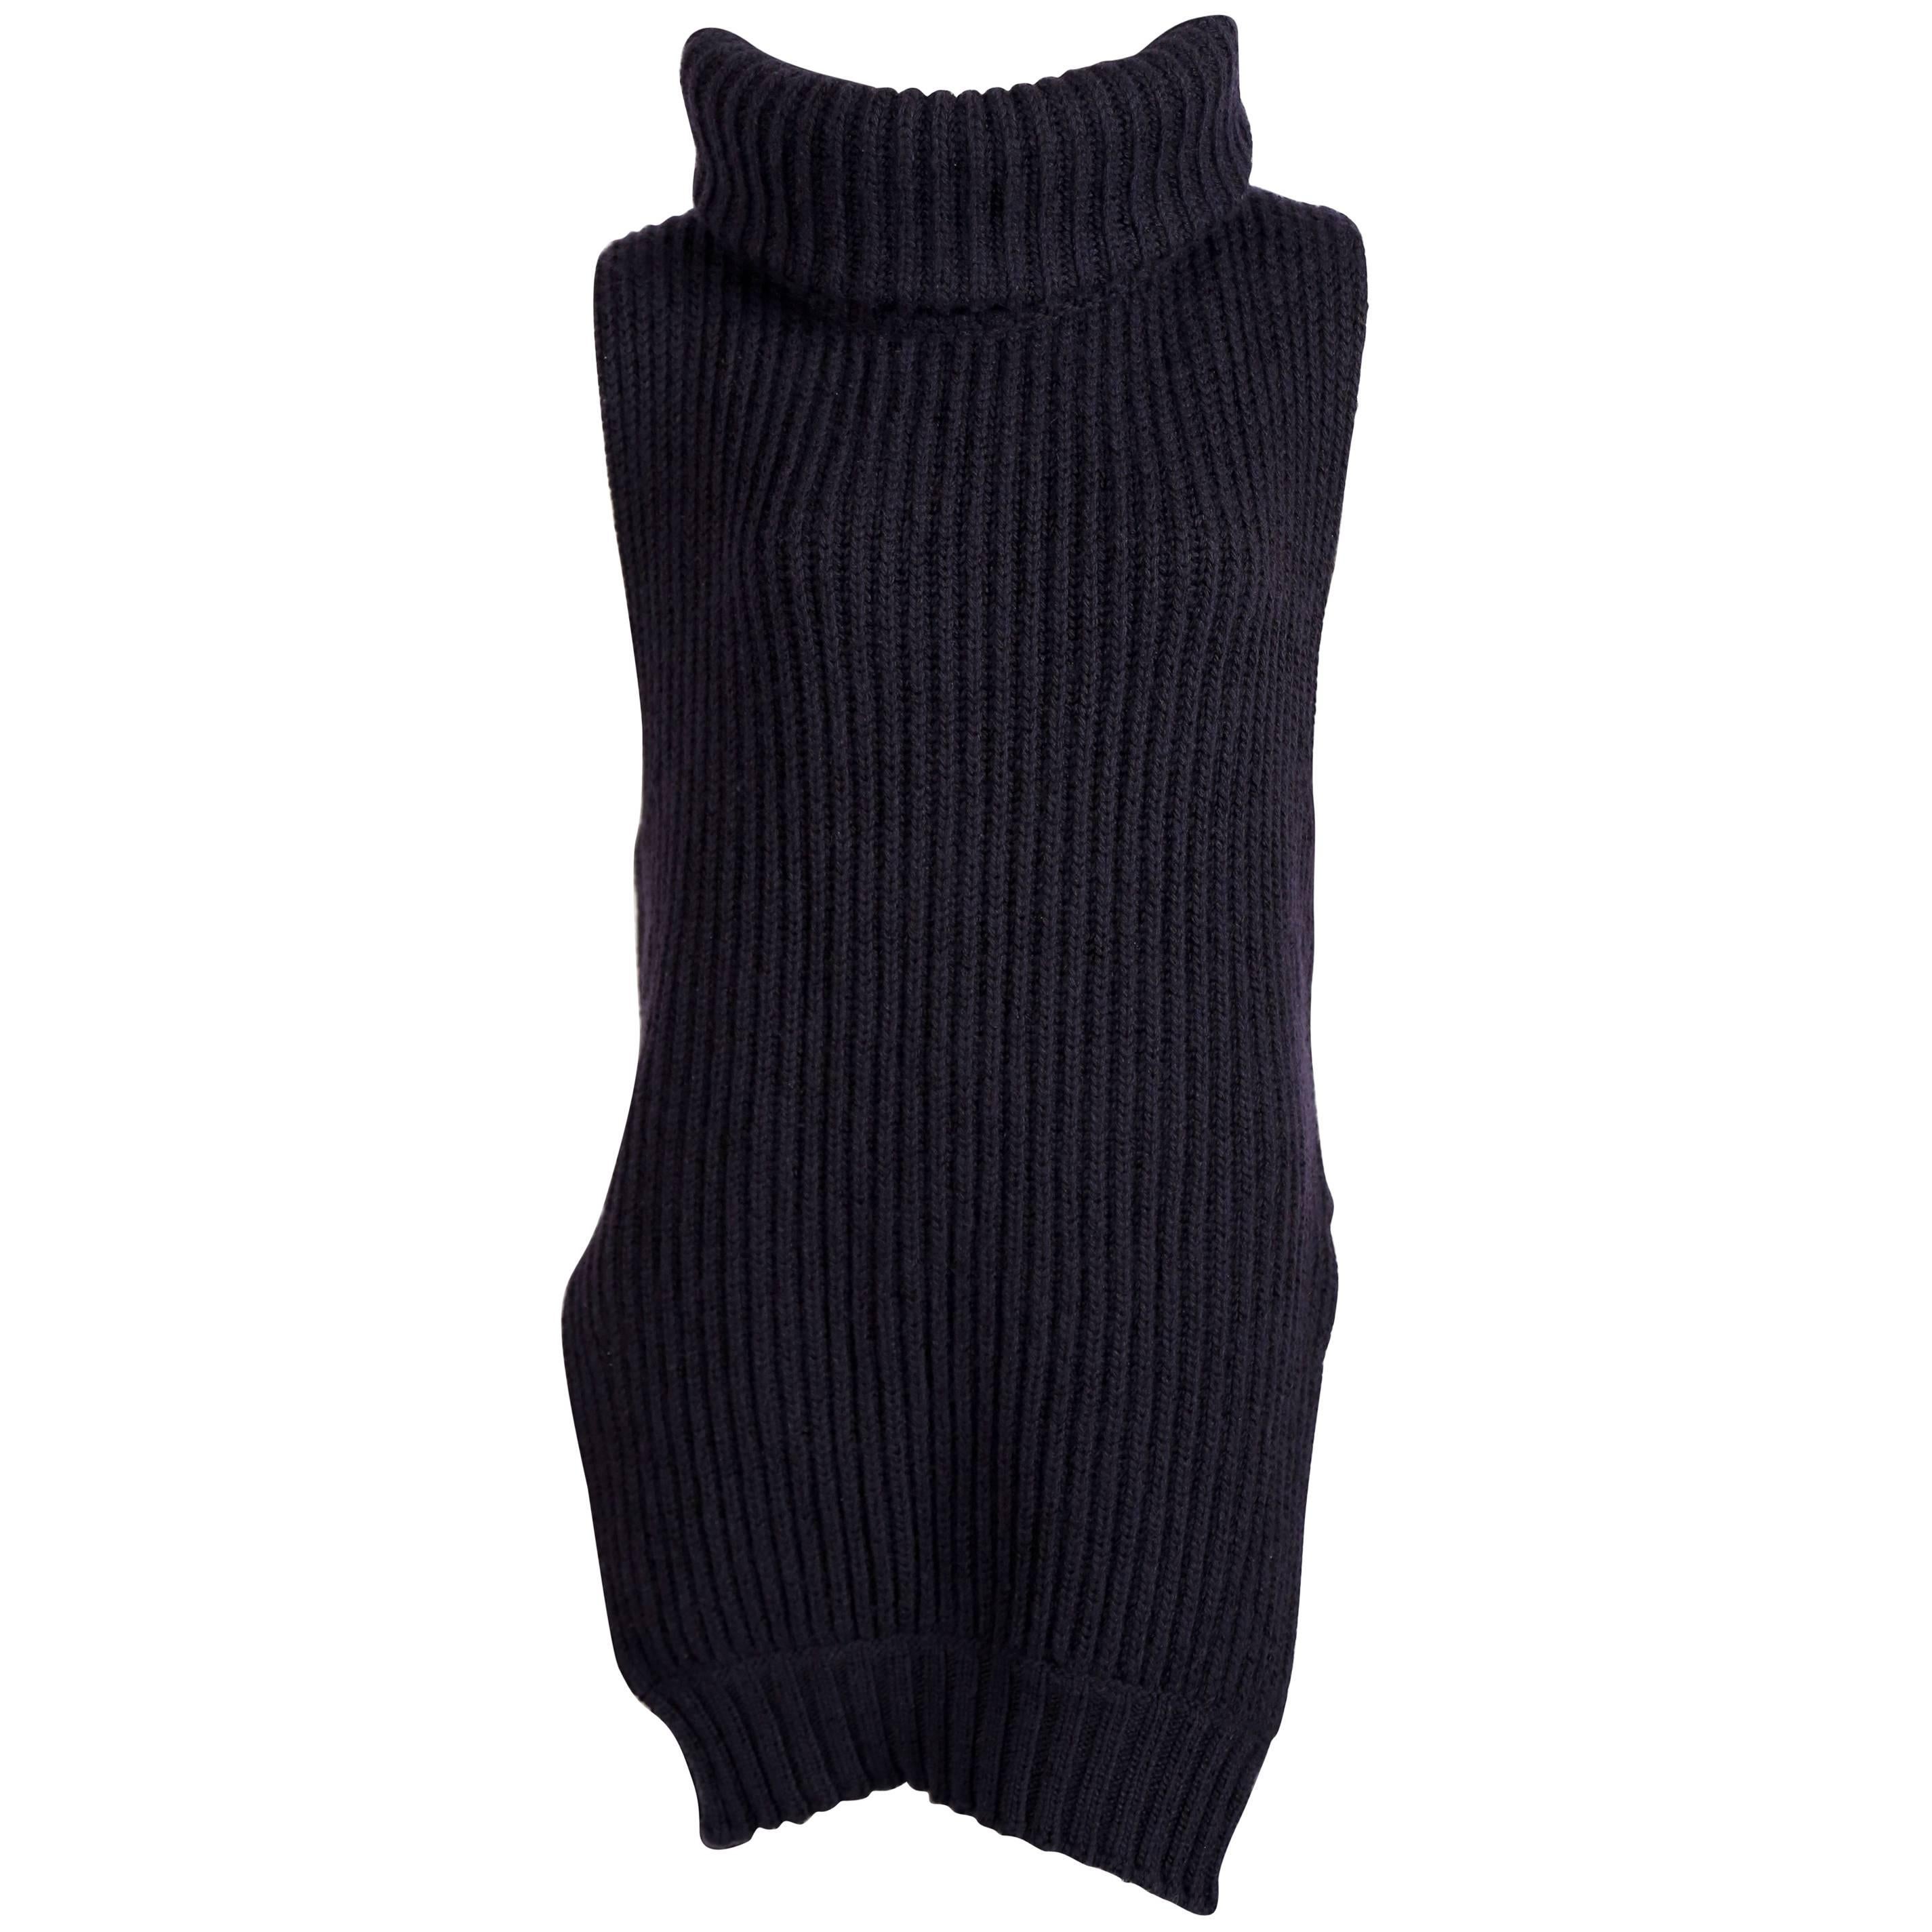 Celine by Phoebe Philo navy blue wool and cashmere runway tunic sweater